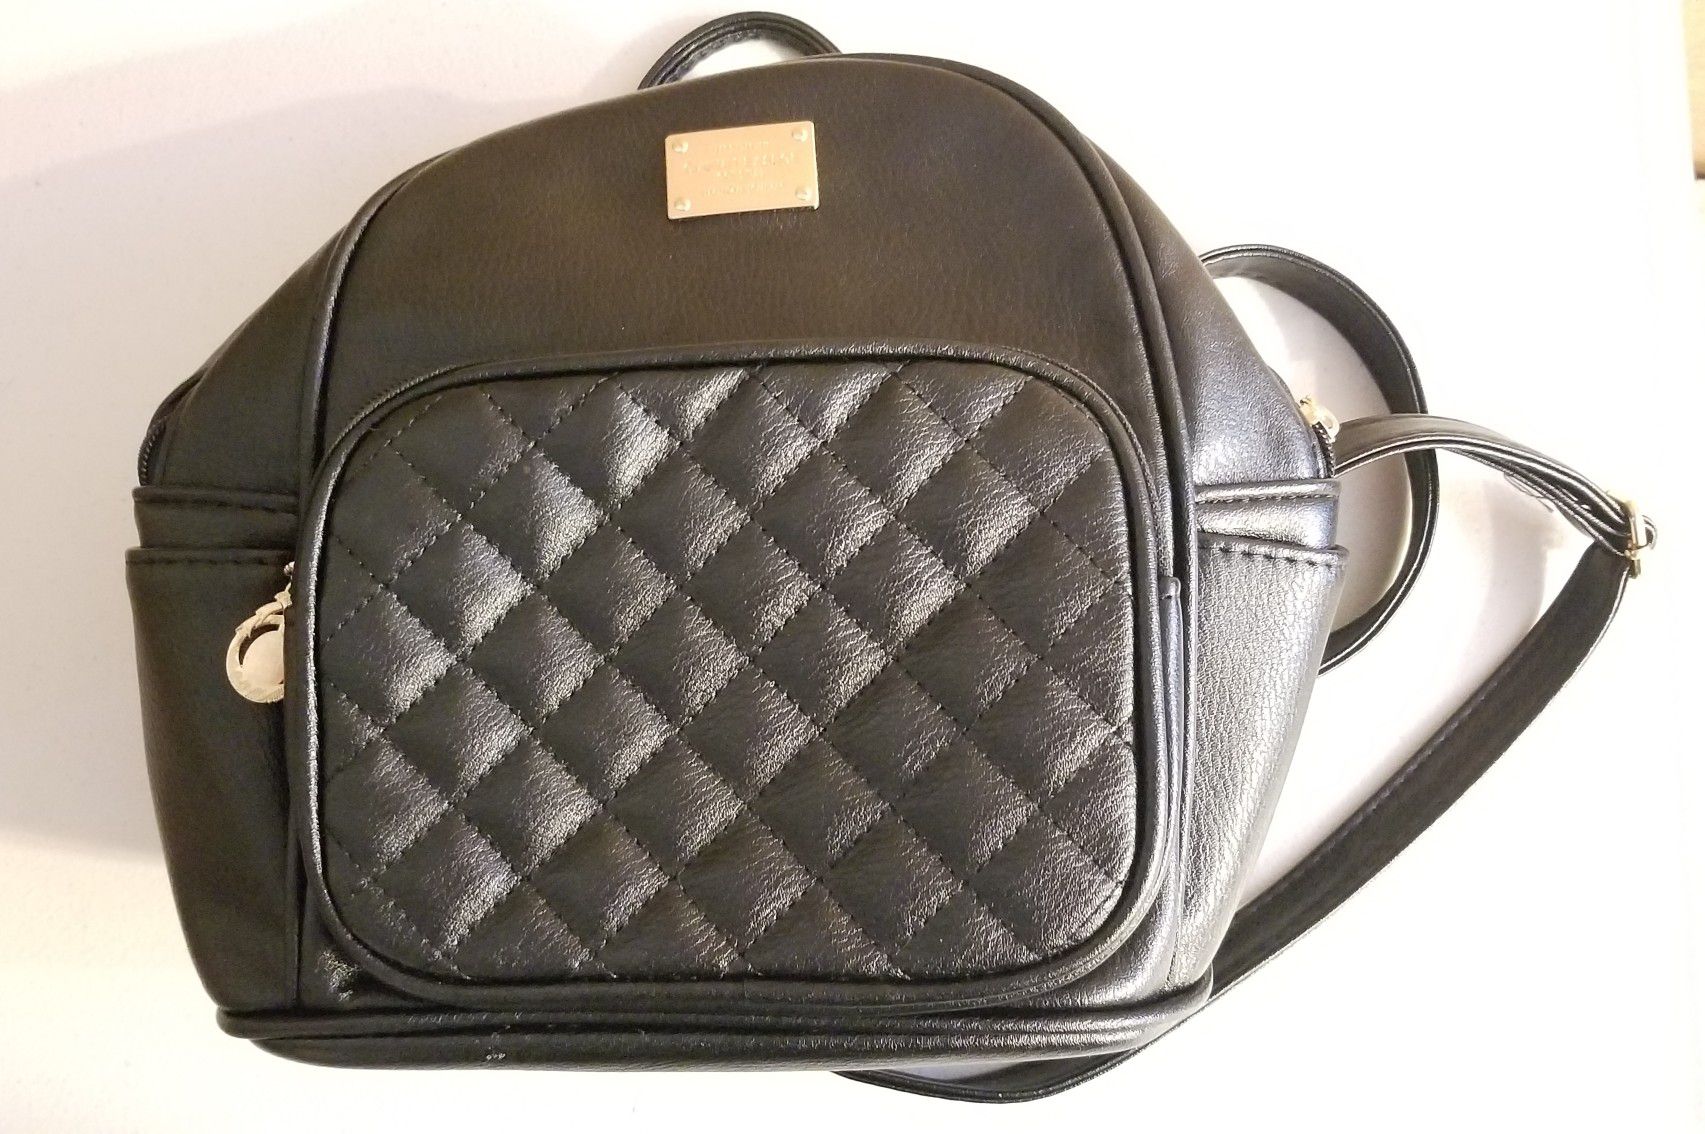 Cianmi Veasrge mini leather backpack/purse (NEW)